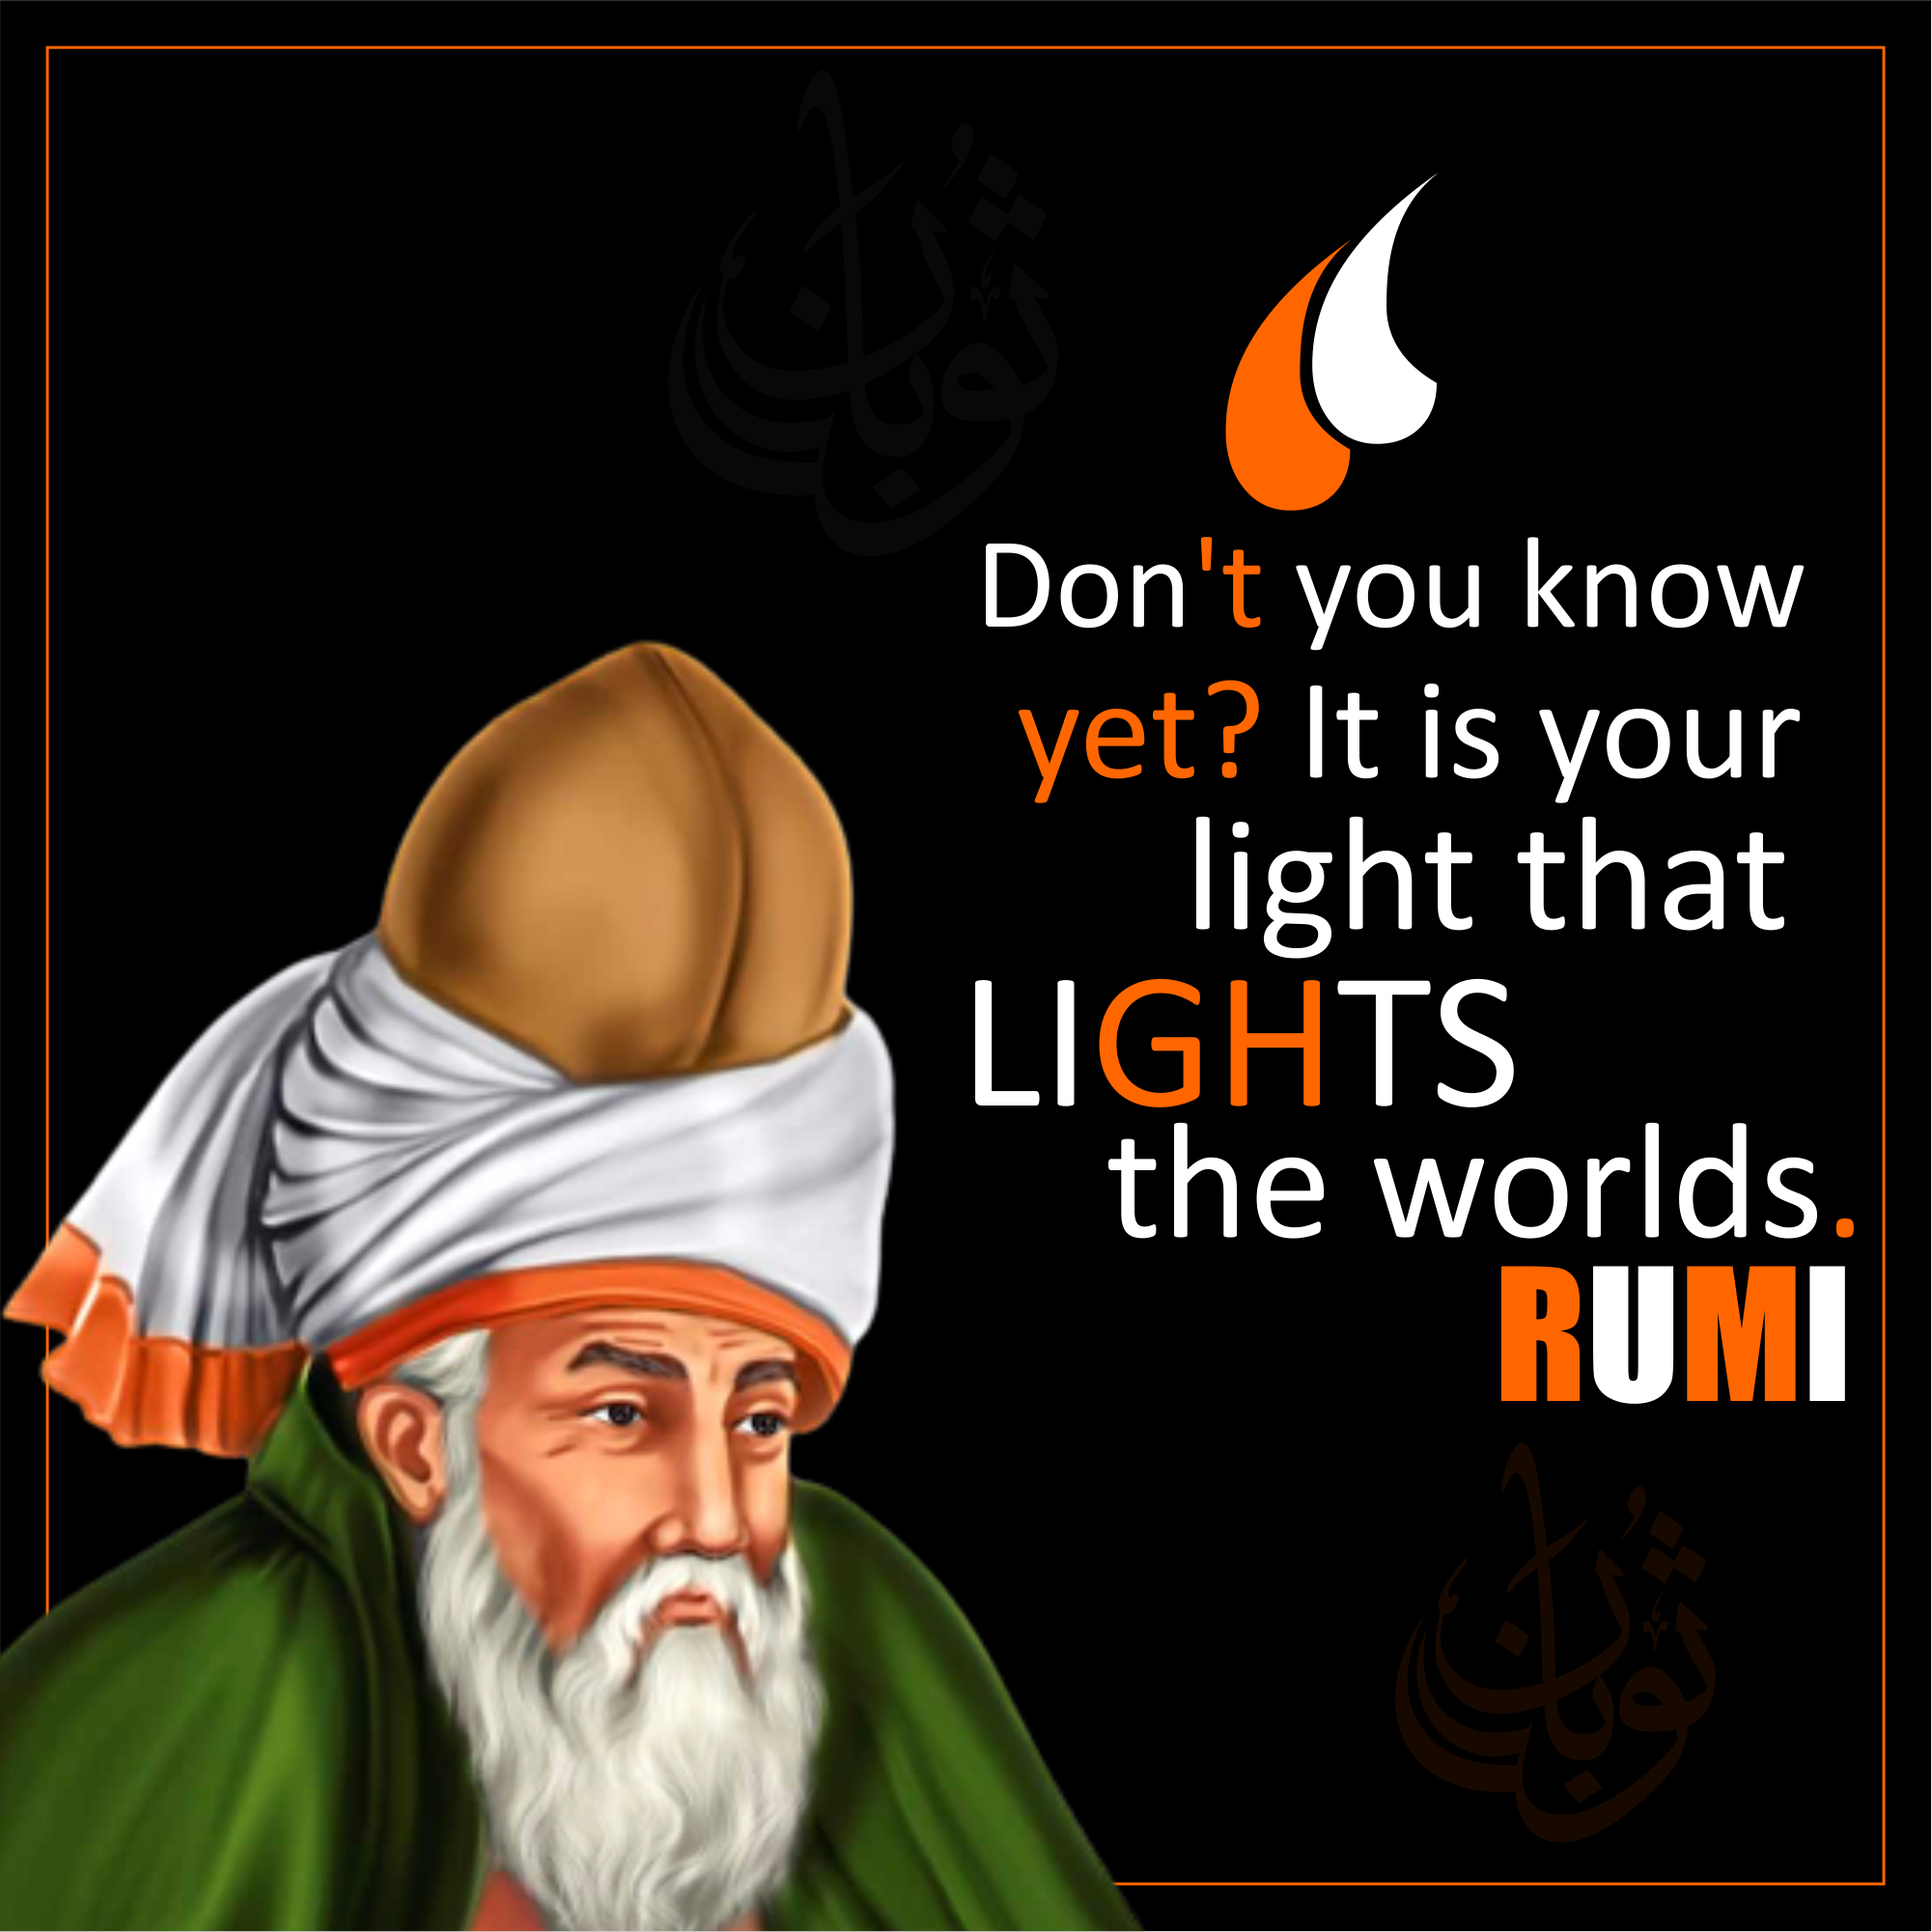 20 MOST FAMOUS QUOTES OF RUMI